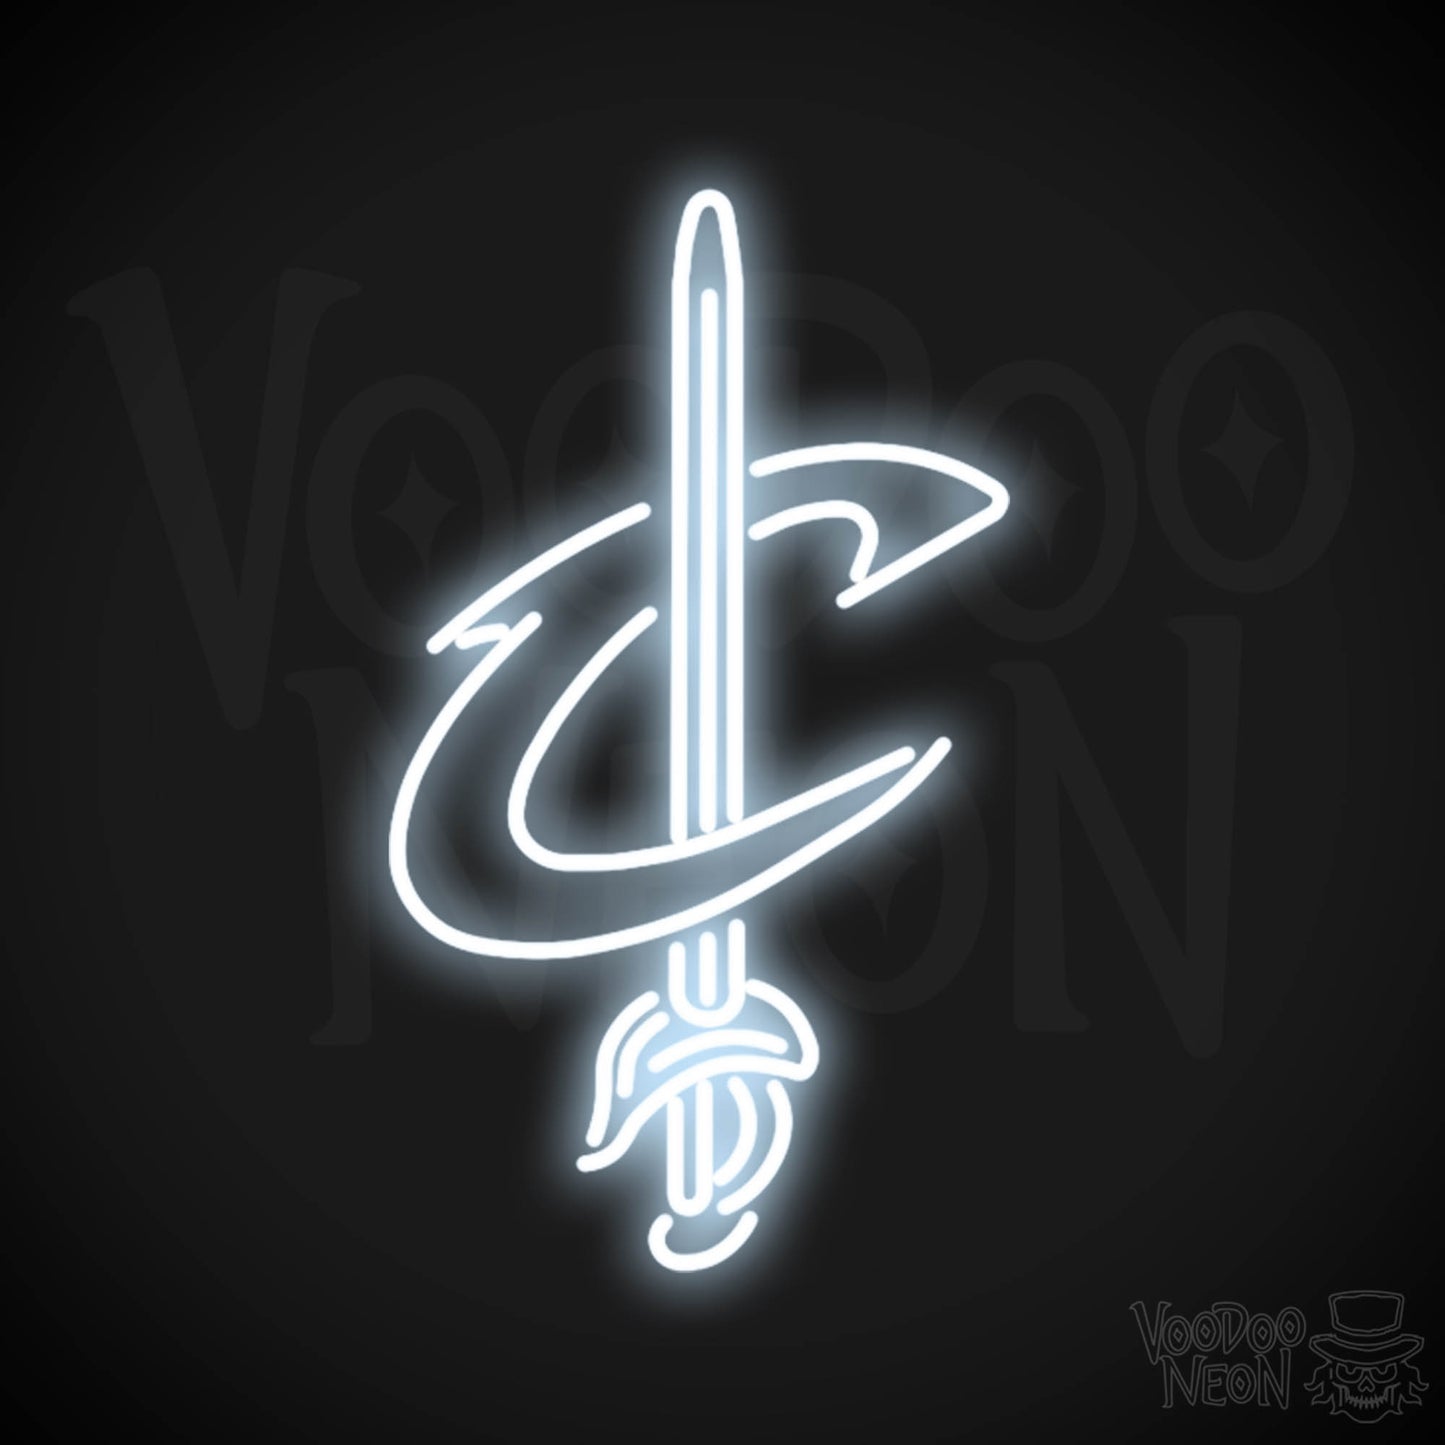 Cleveland Cavaliers Neon Sign - Cleveland Cavaliers Sign - Neon Cavaliers Wall Art - Color Cool White